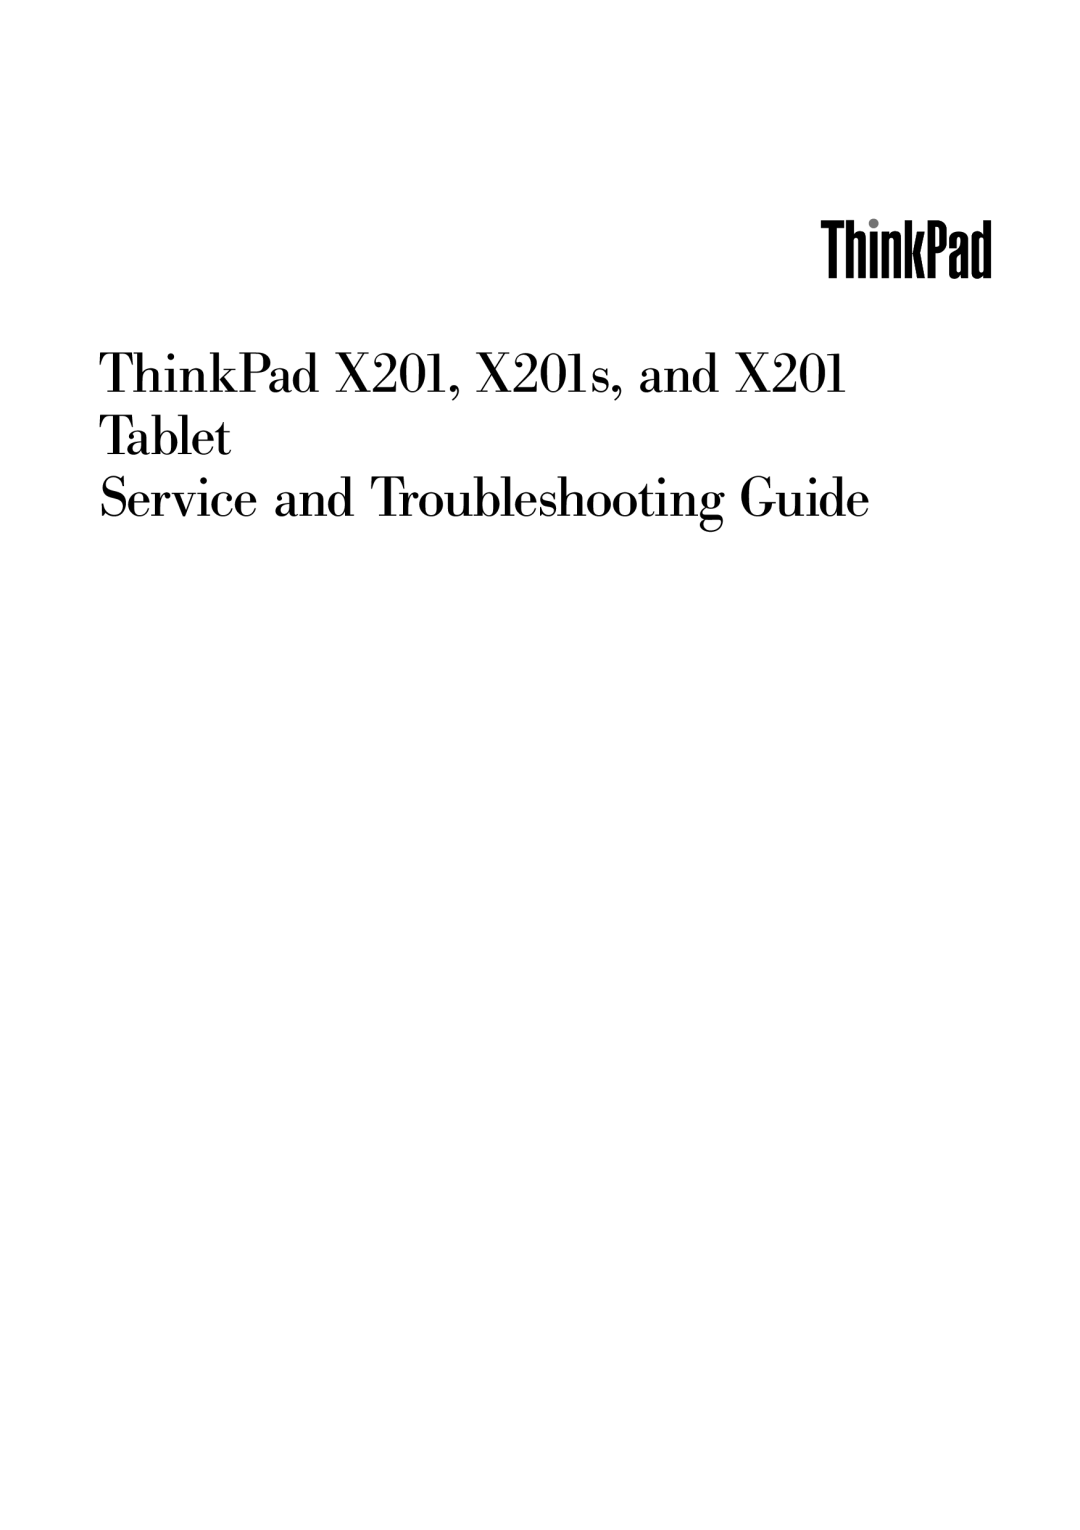 Lenovo 311396U, X201S, 309392U, 309323U, 309395U manual ThinkPad X201, X201s, and Tablet Service and Troubleshooting Guide 